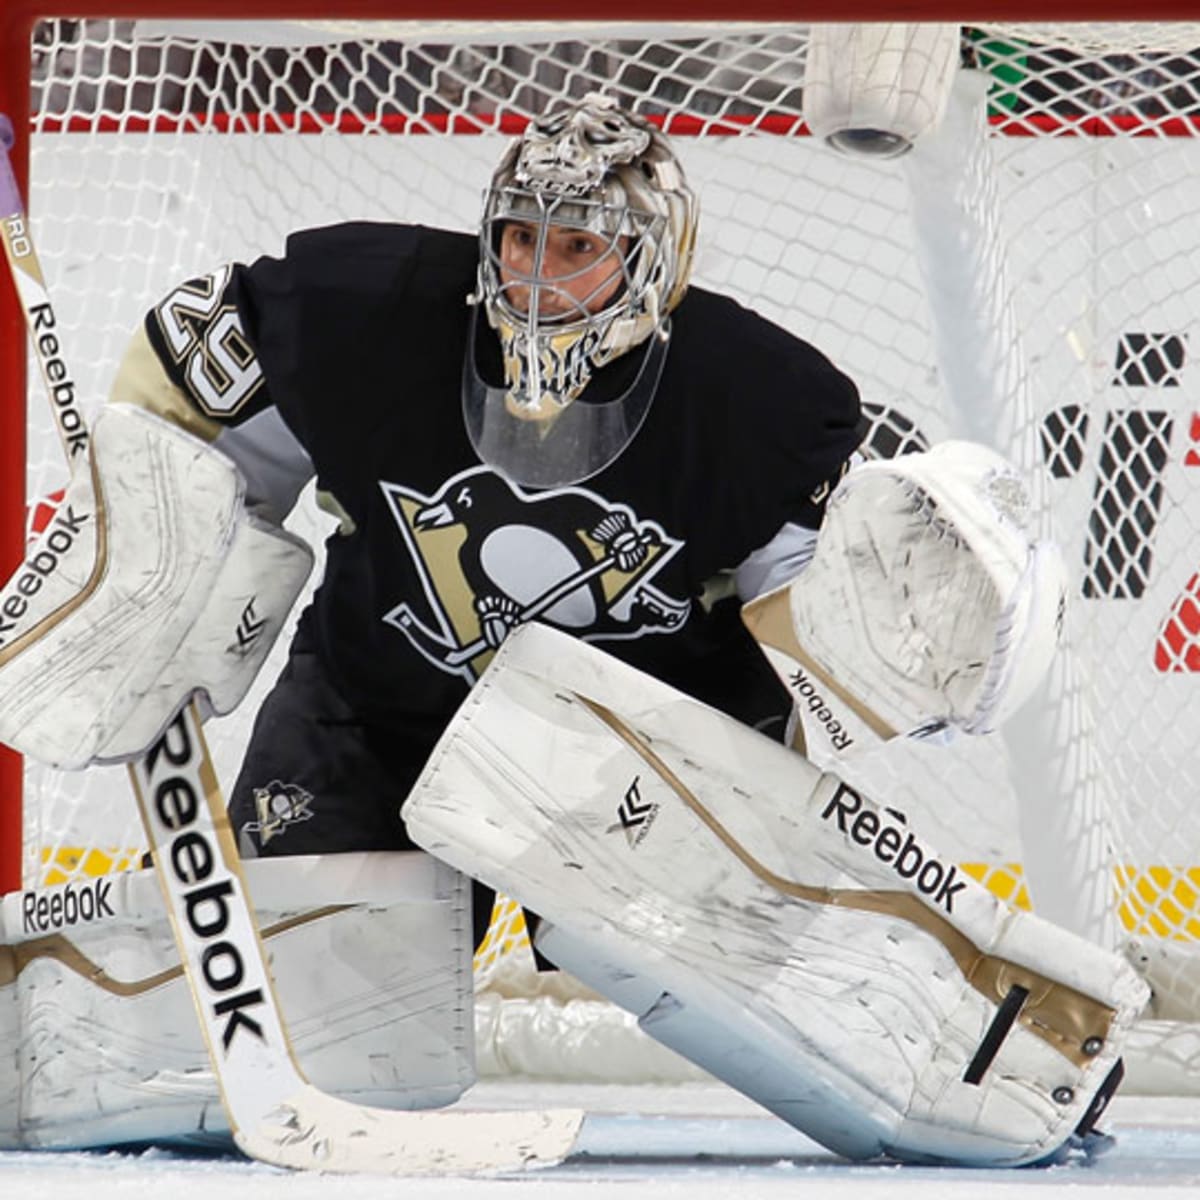 Marc-Andre Fleury reunion with the Penguins seemingly off the